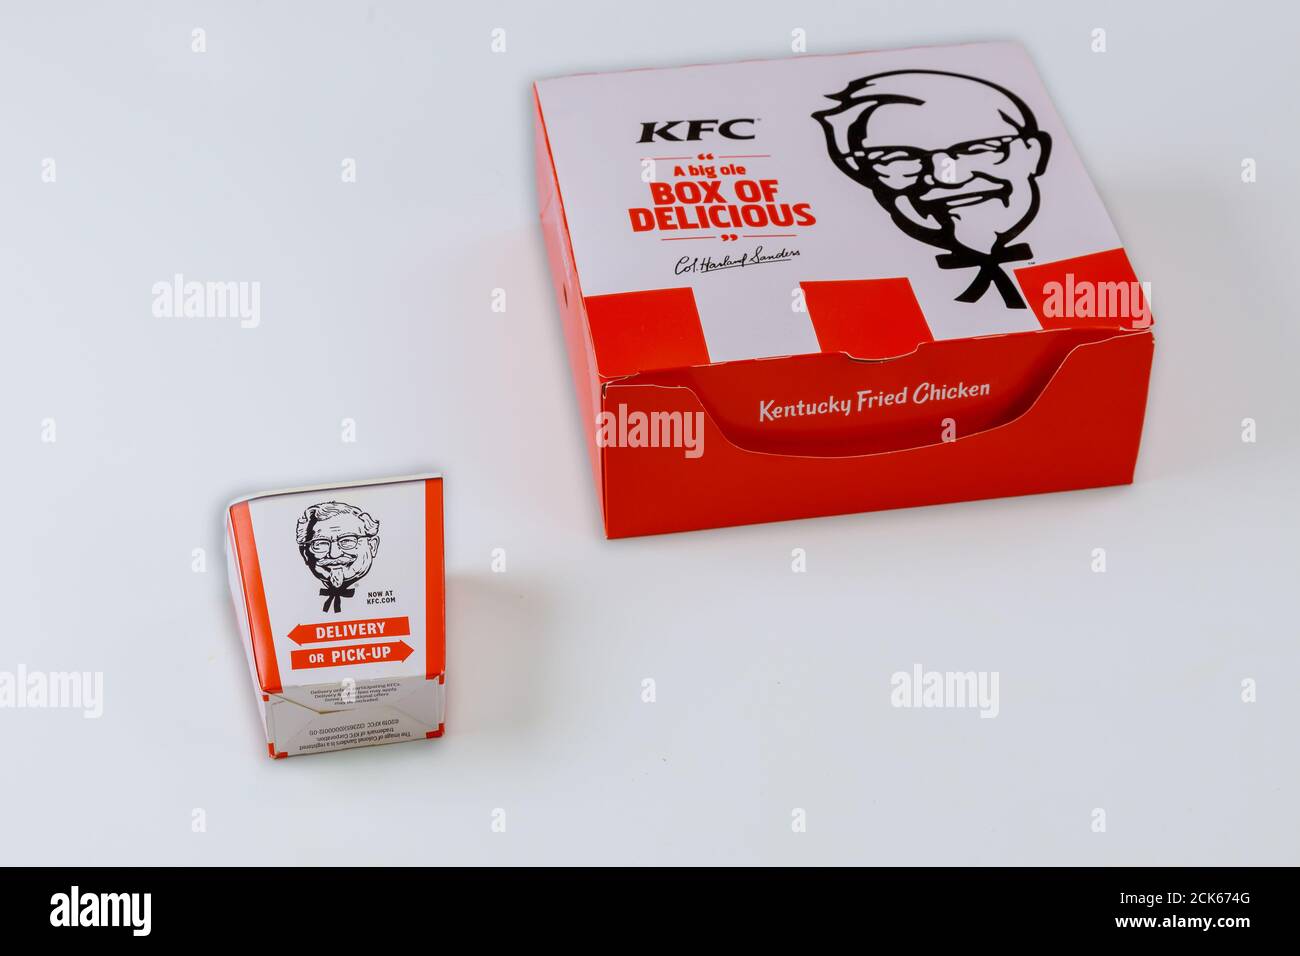 CLEVELAND OH US 15 SEPTEMBER 2020: KFC Popular fast food restaurant now featured menu the box Stock Photo